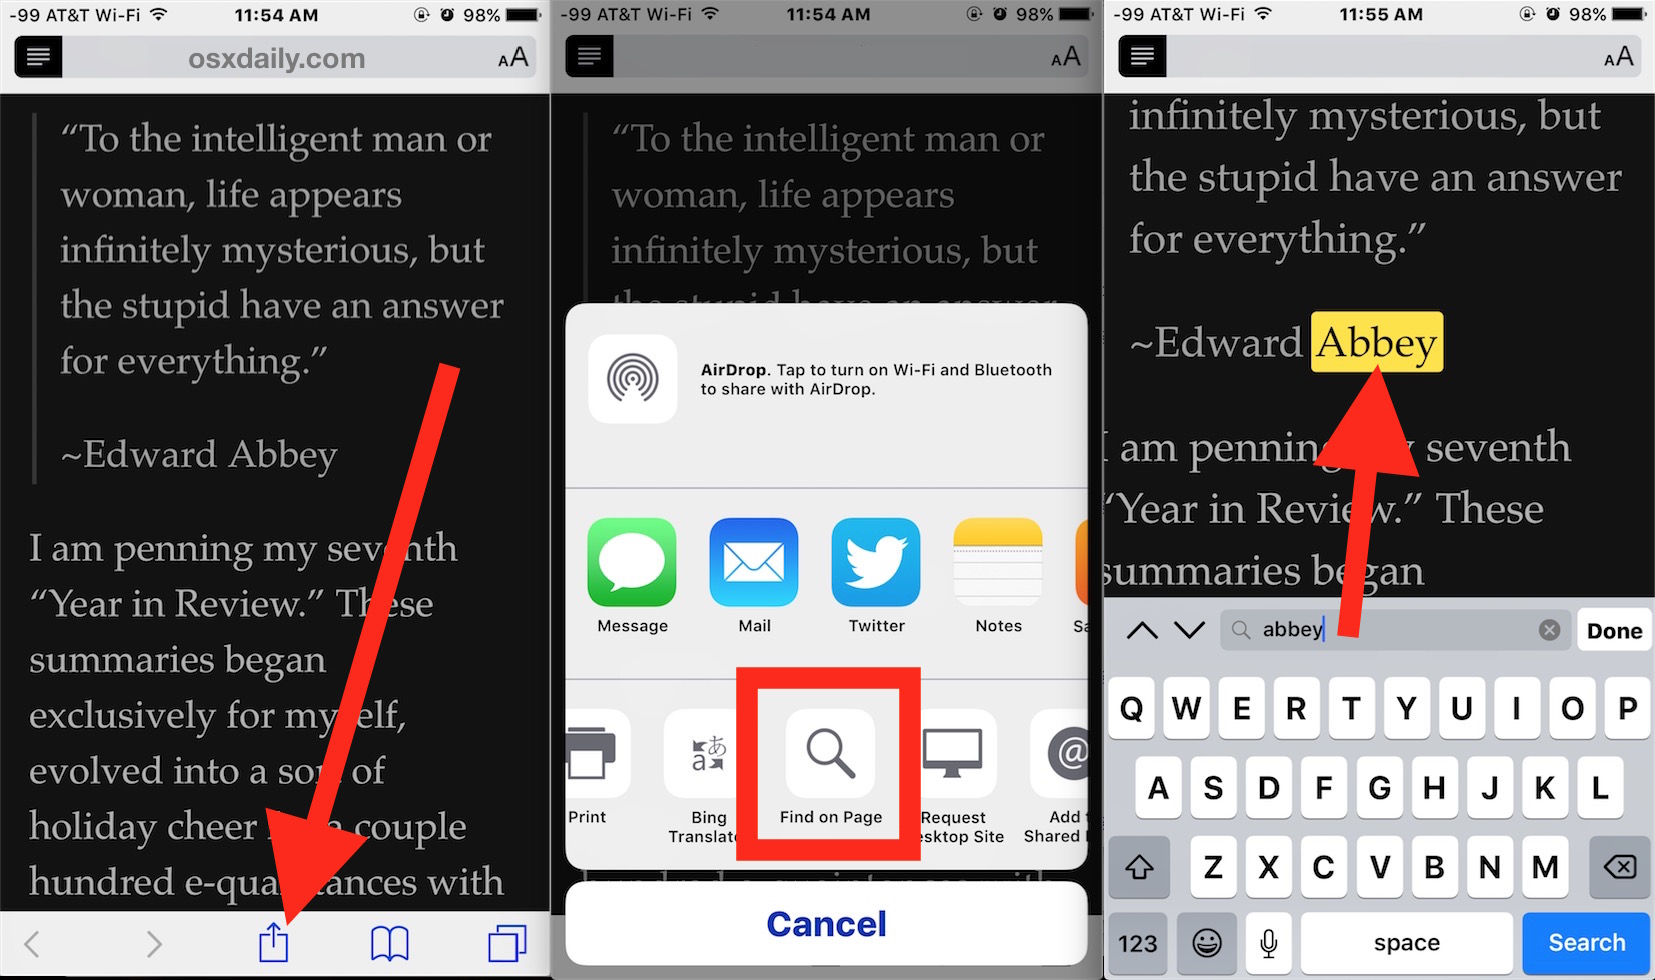 How to find text on web pages in Safari for iOS 12, iOS 11, iOS 10, iOS 9